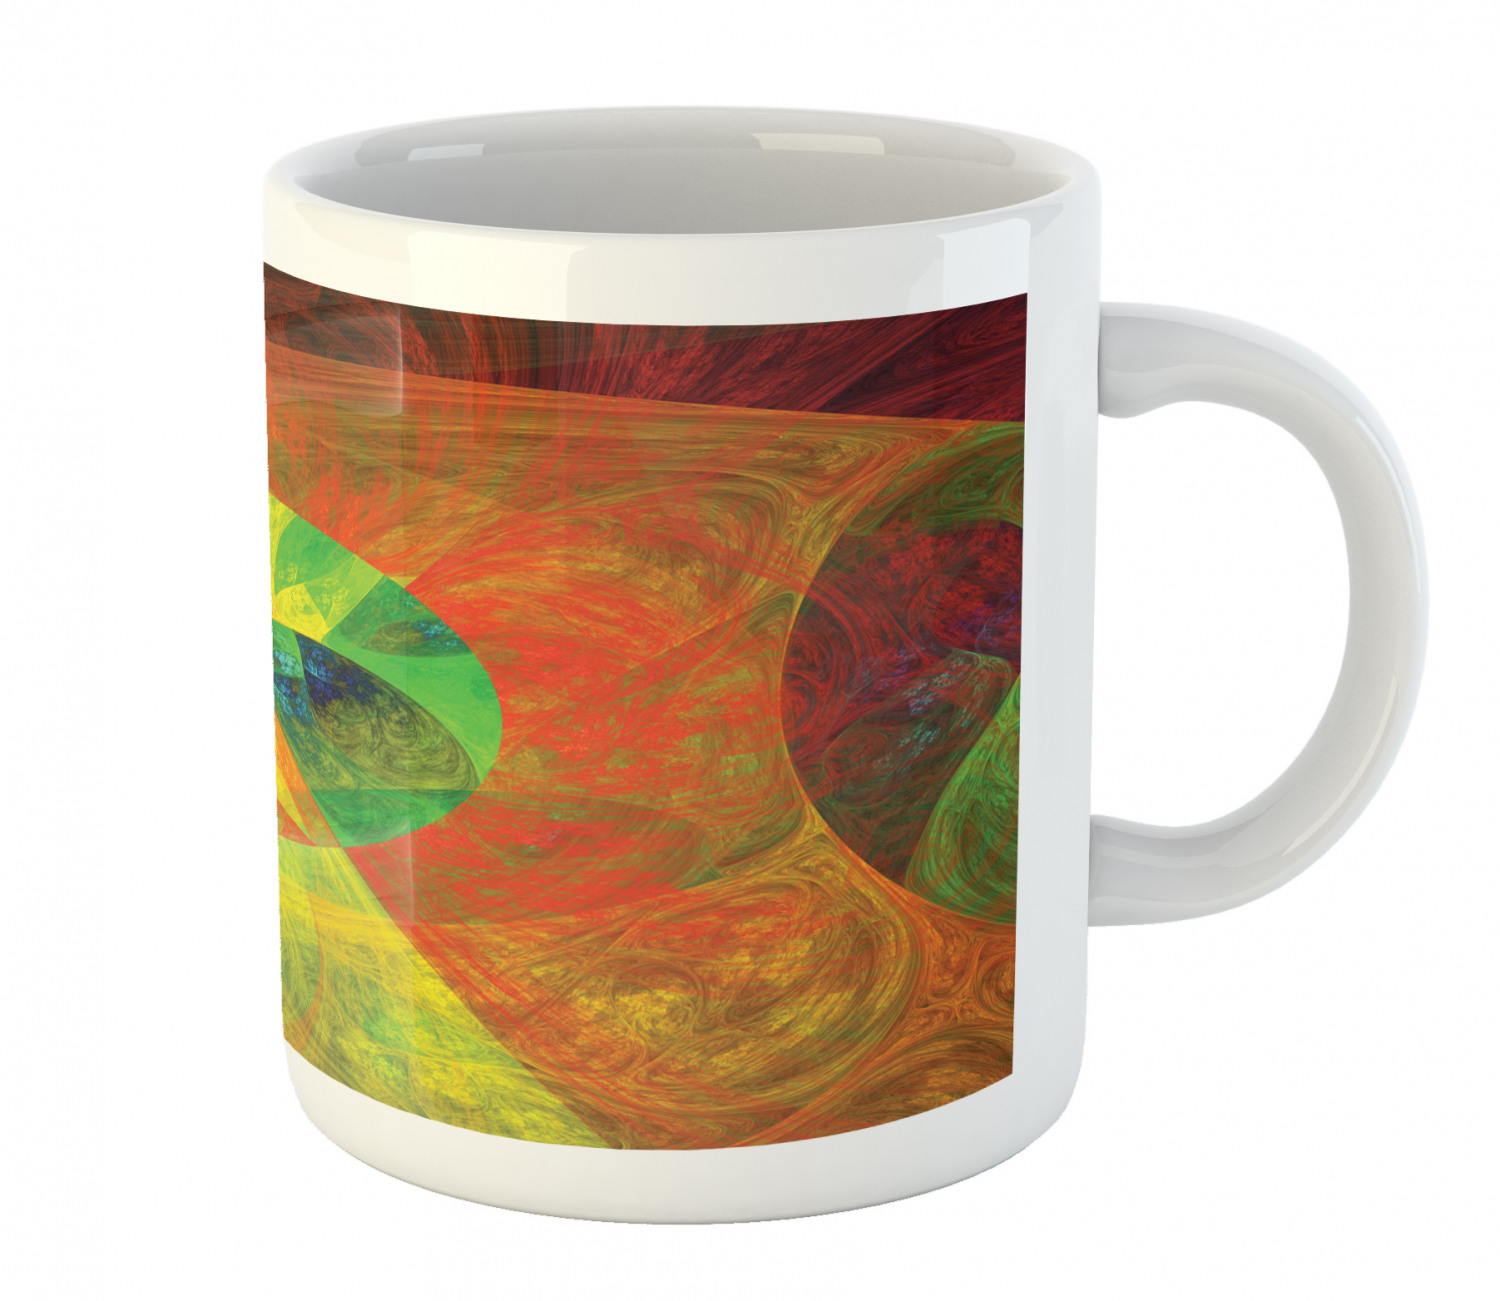 Ambesonne Psychedelic Ceramic Coffee Mug Cup for Water Tea Drinks, 11 ...